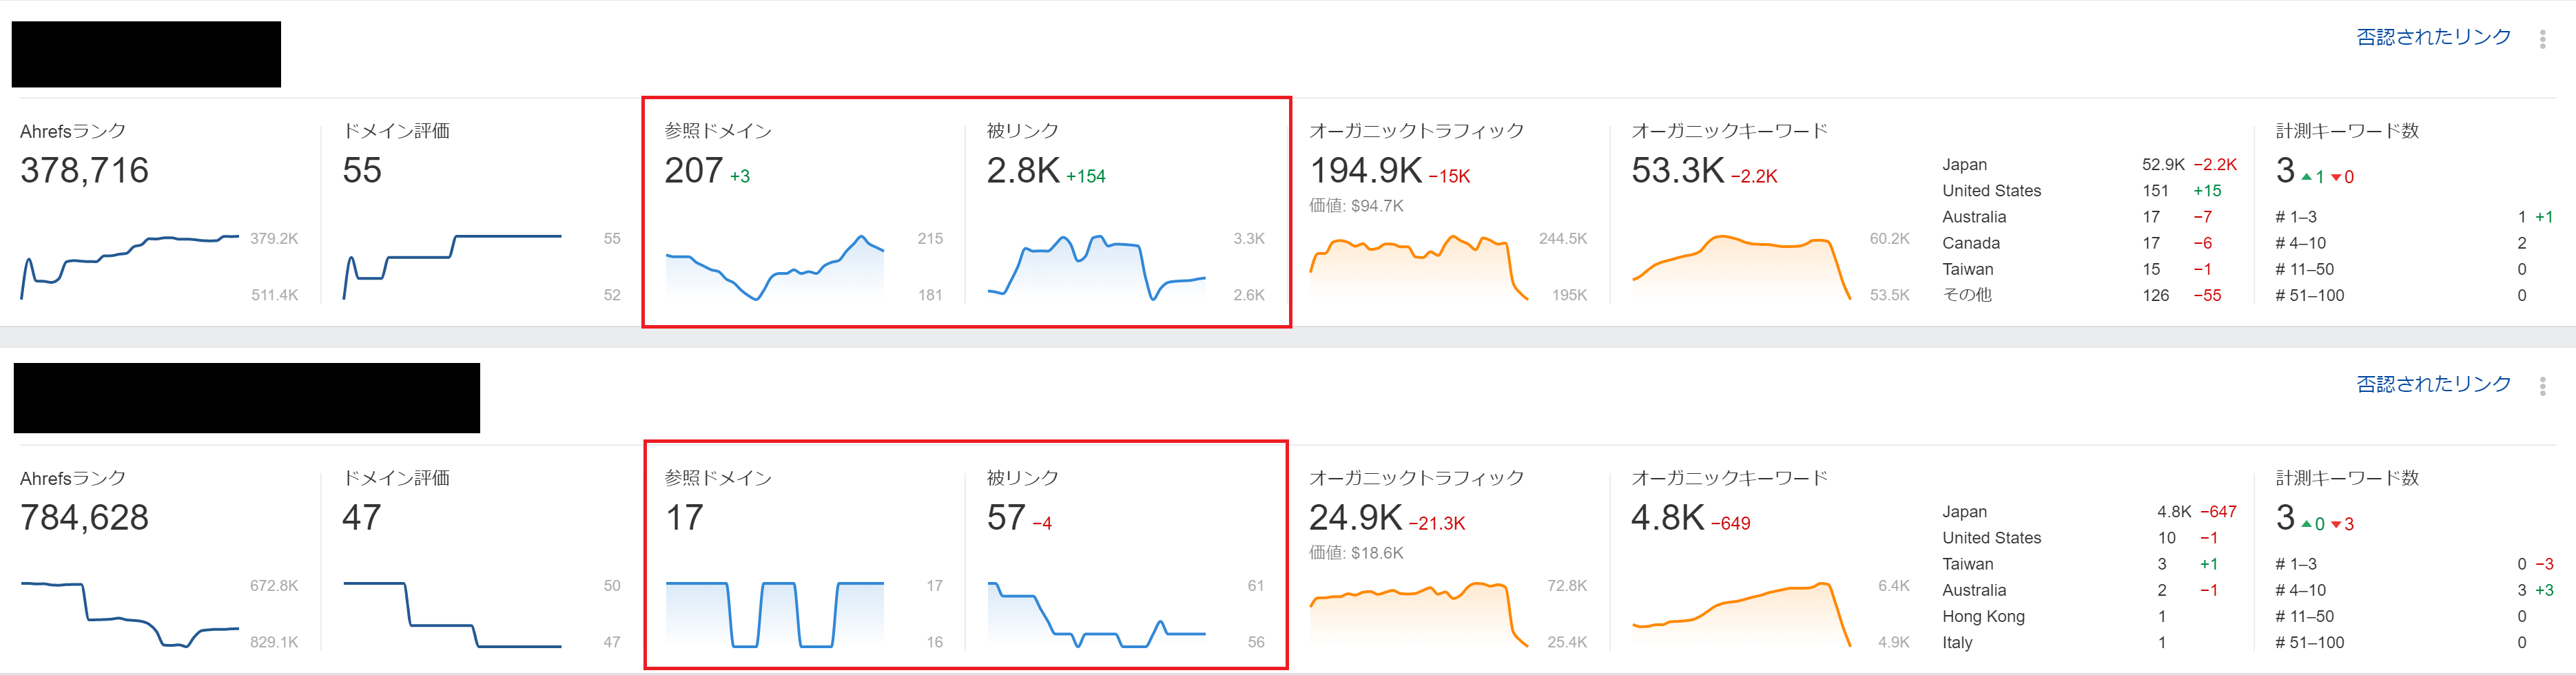 Ahrefs 被リンク数と被リンク元